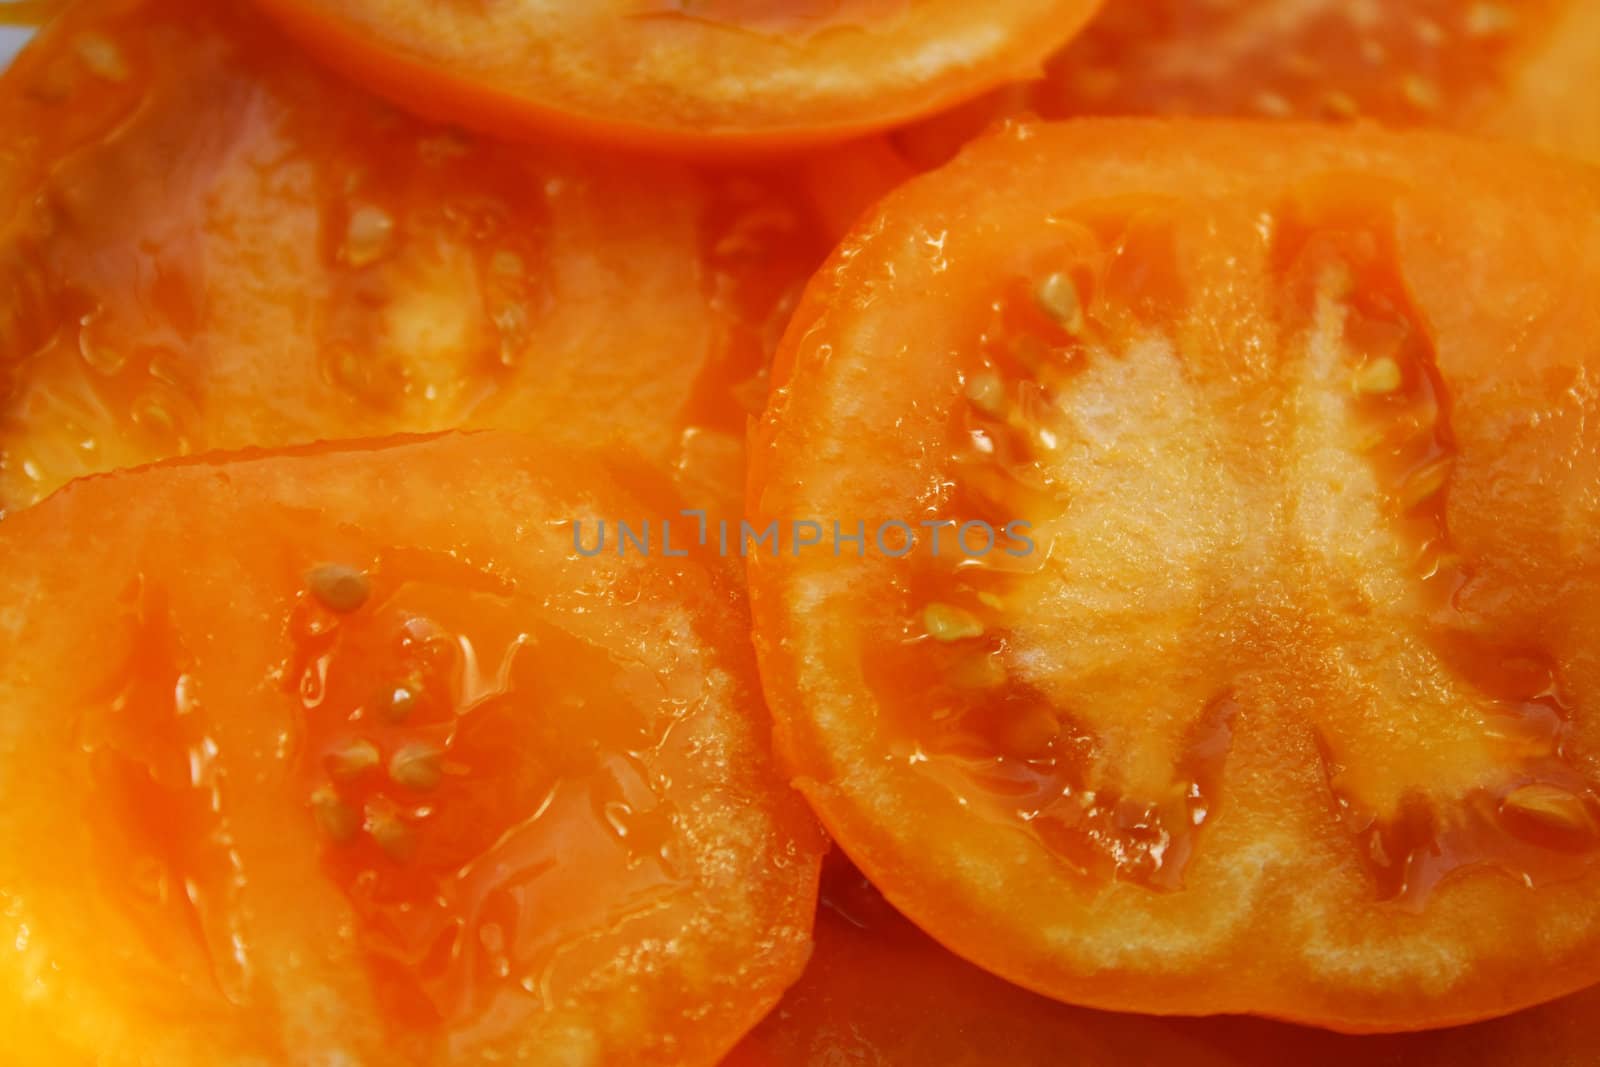 Close up of the yellow sliced tomato.